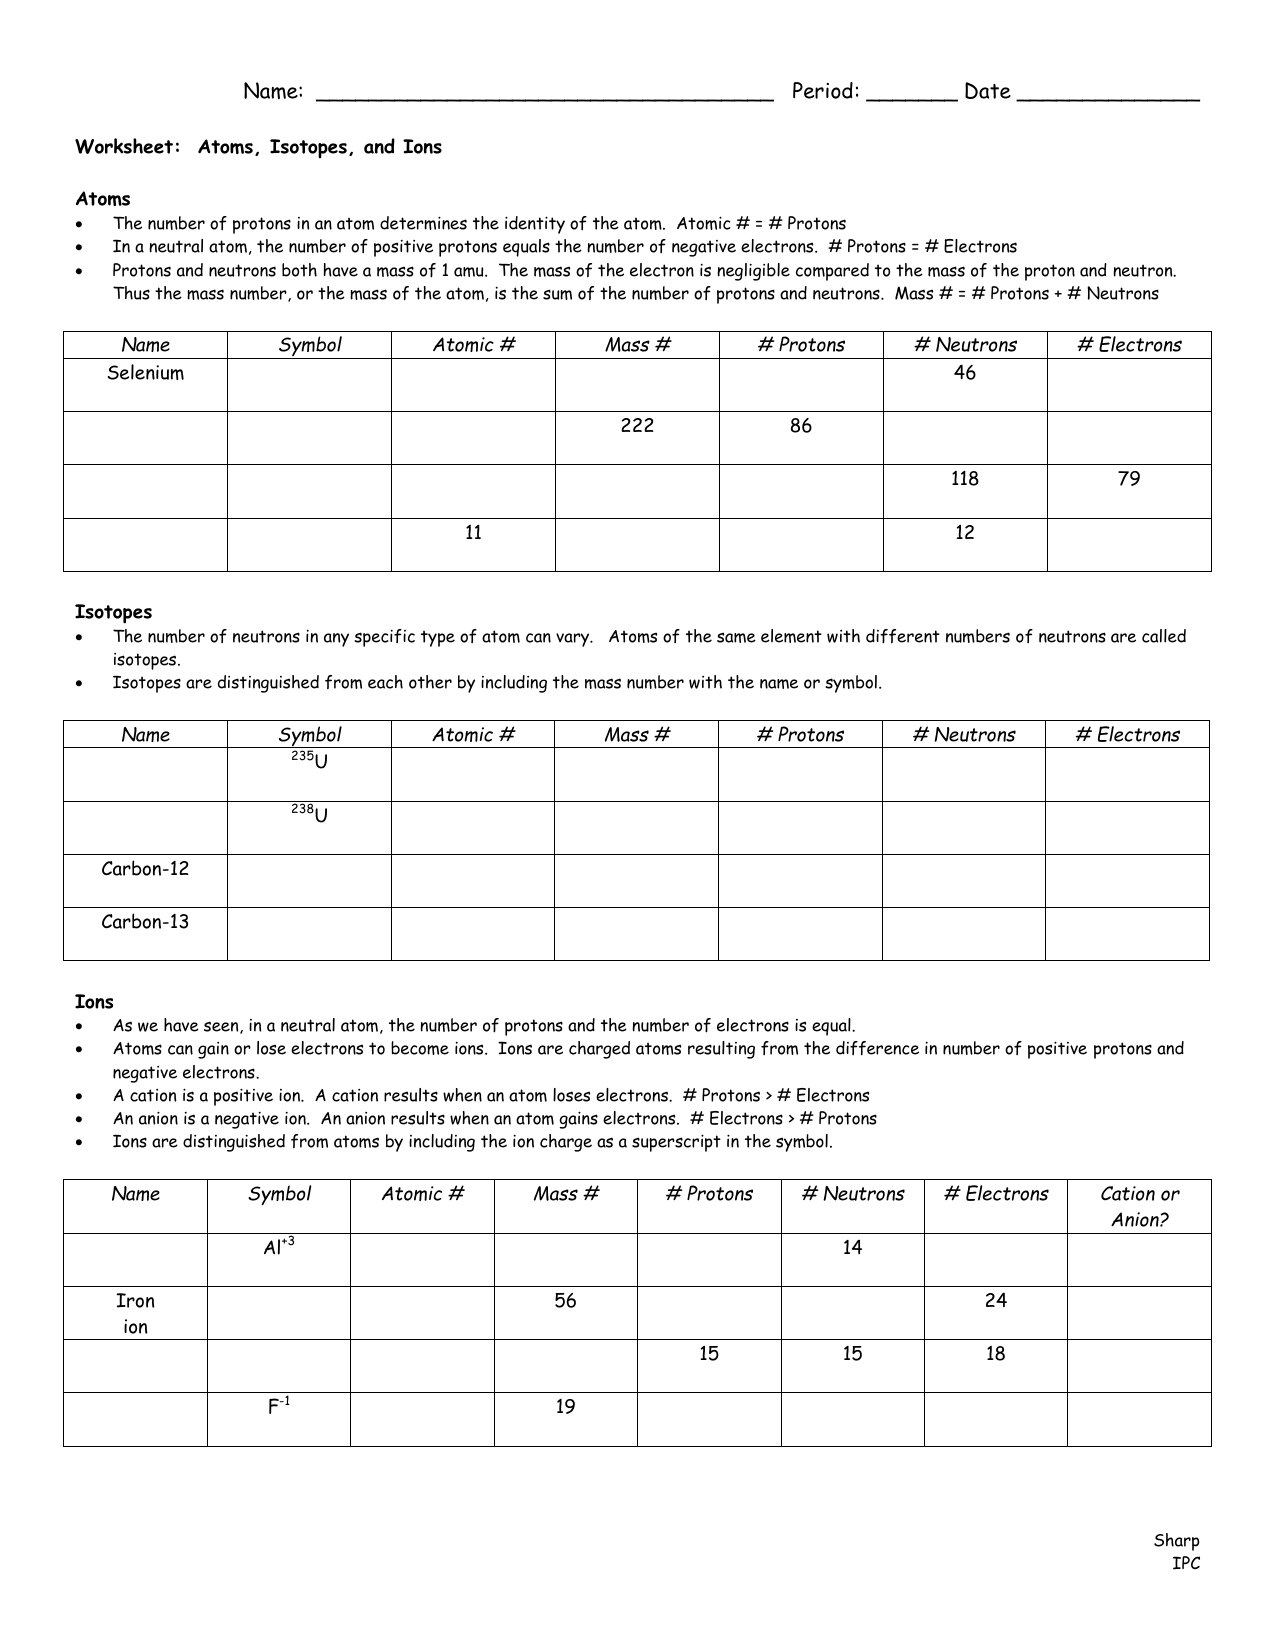 Atoms, Isotopes, & Ions Worksheet With Atoms And Ions Worksheet Answers